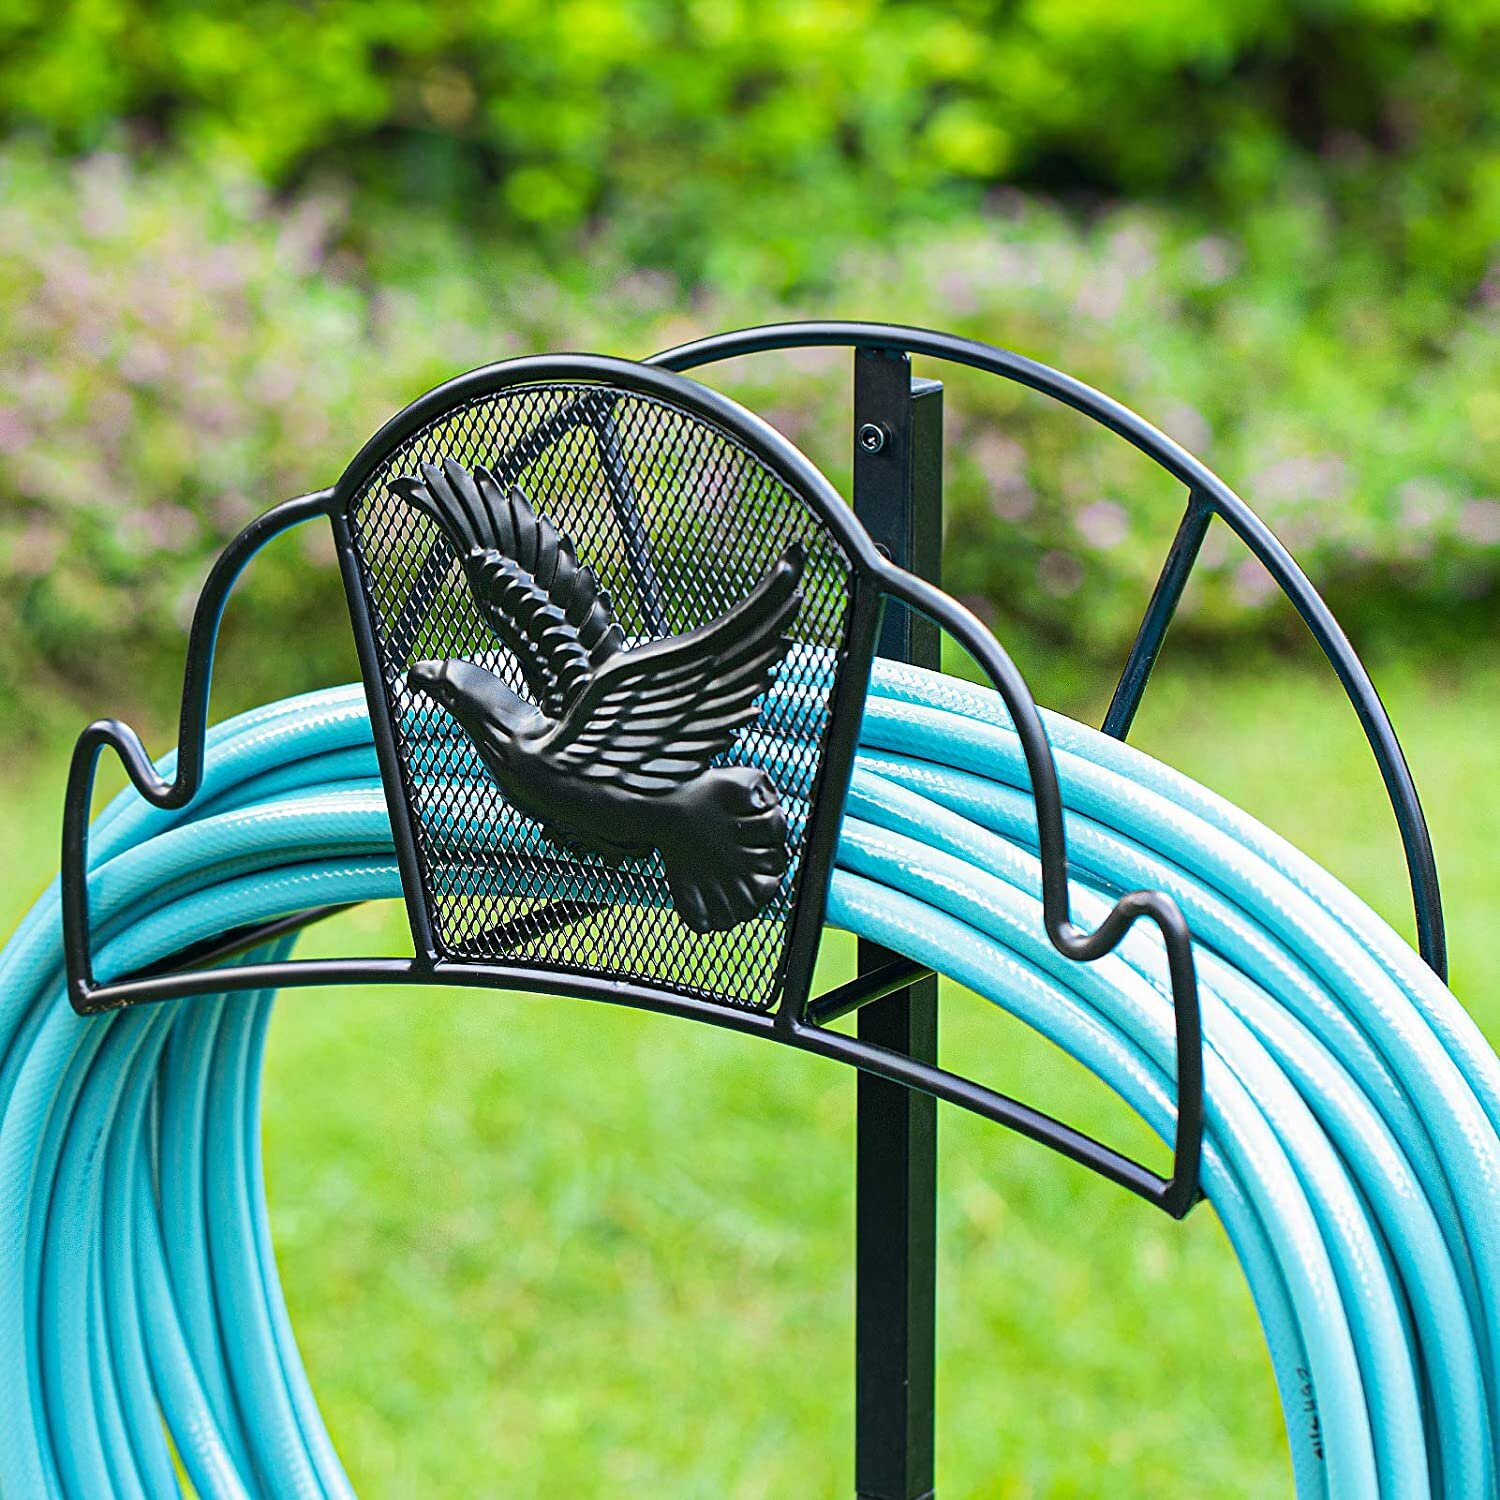 EVEAGE Metal Garden Hose Holder Stake, Heavy-Duty Water Hose Stand